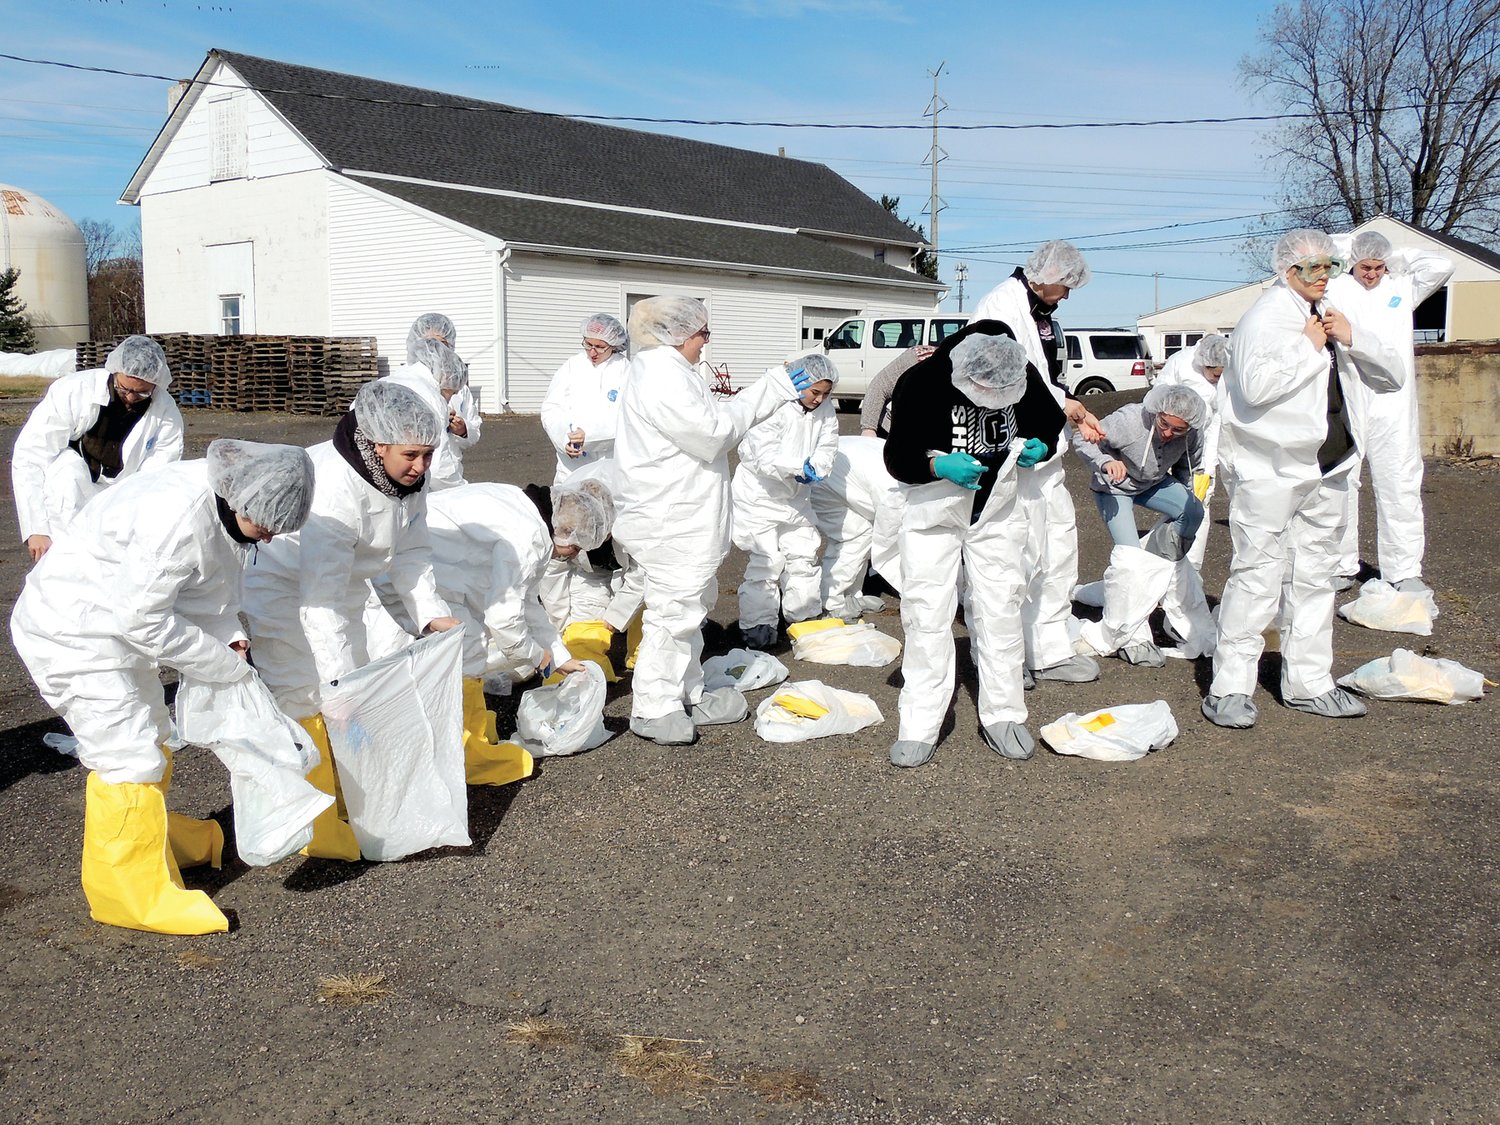 Delaware Valley University students don protective clothing to prepare for a mock disease outbreak exercise. Photograph by Delaware Valley University.